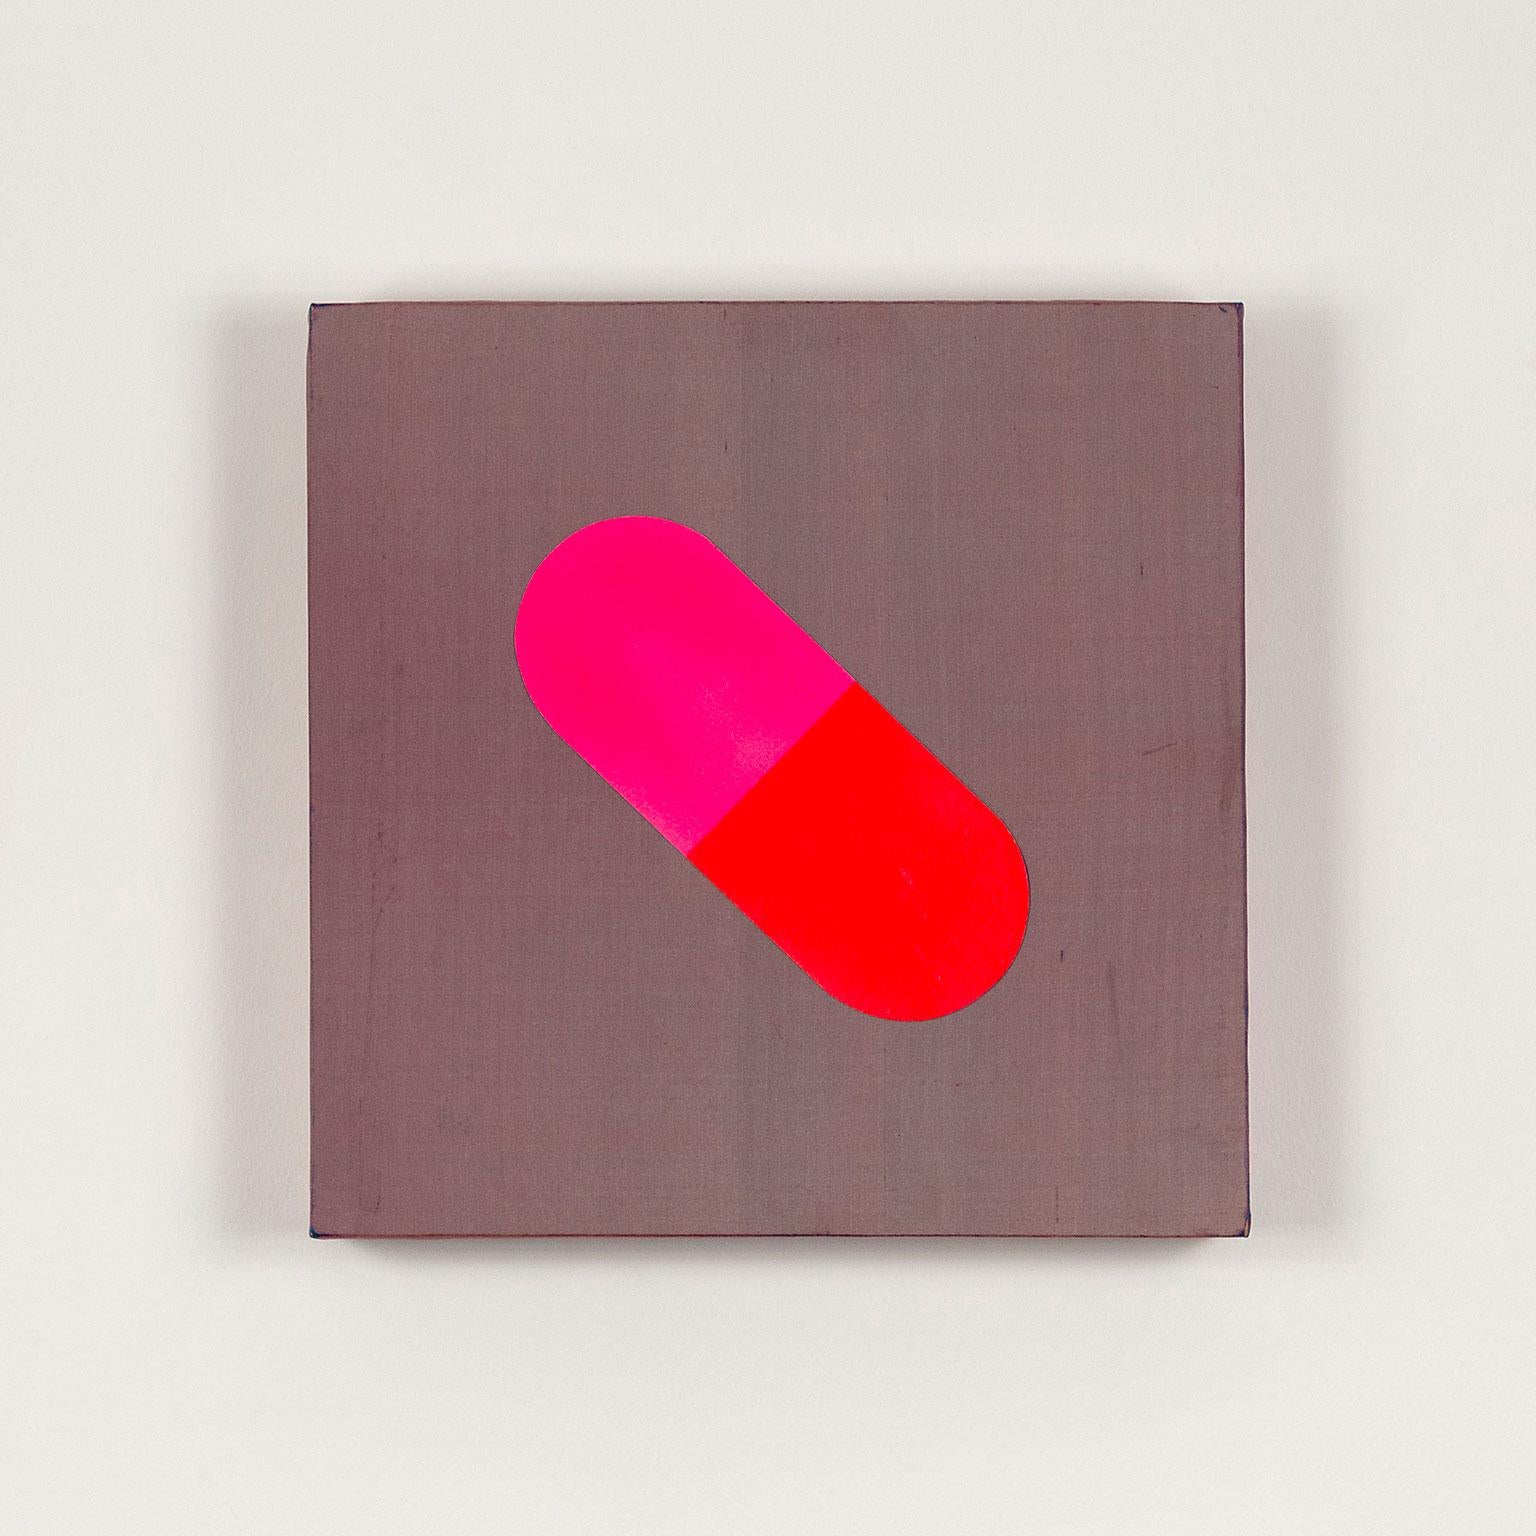 Capsule - Painting by General Idea